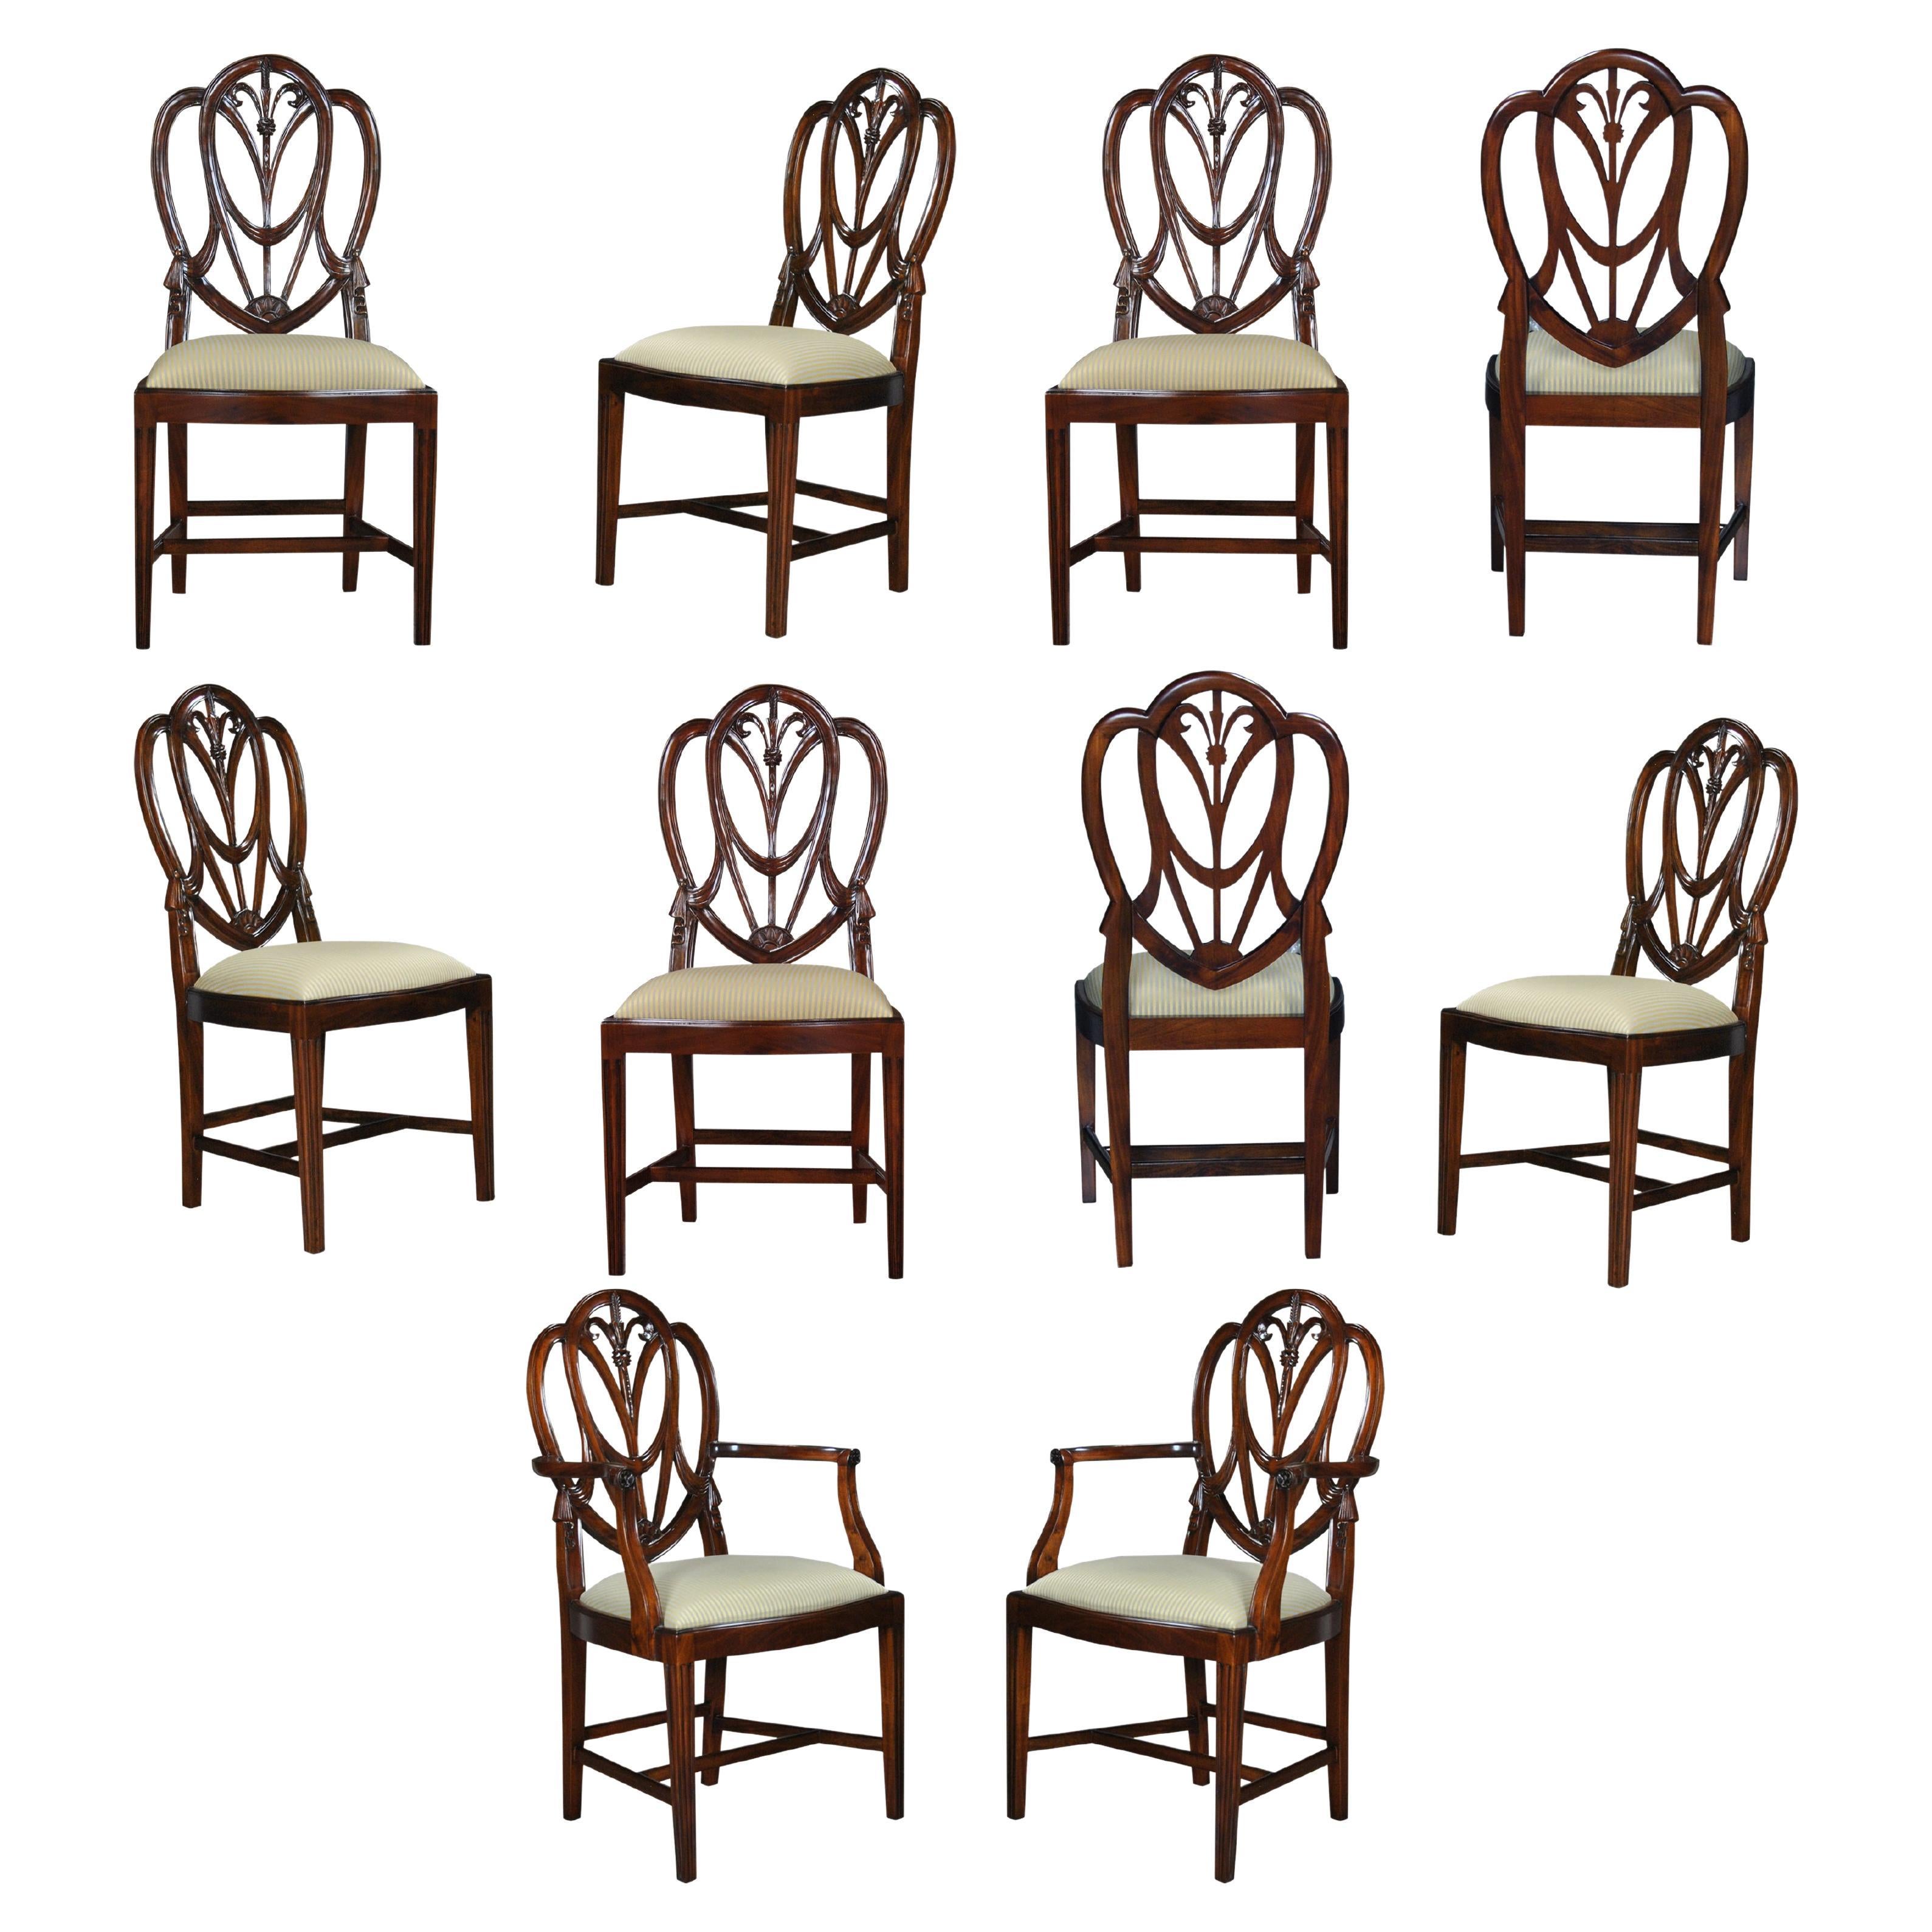 Tall Sweet Heart Chairs, Set of 10 For Sale